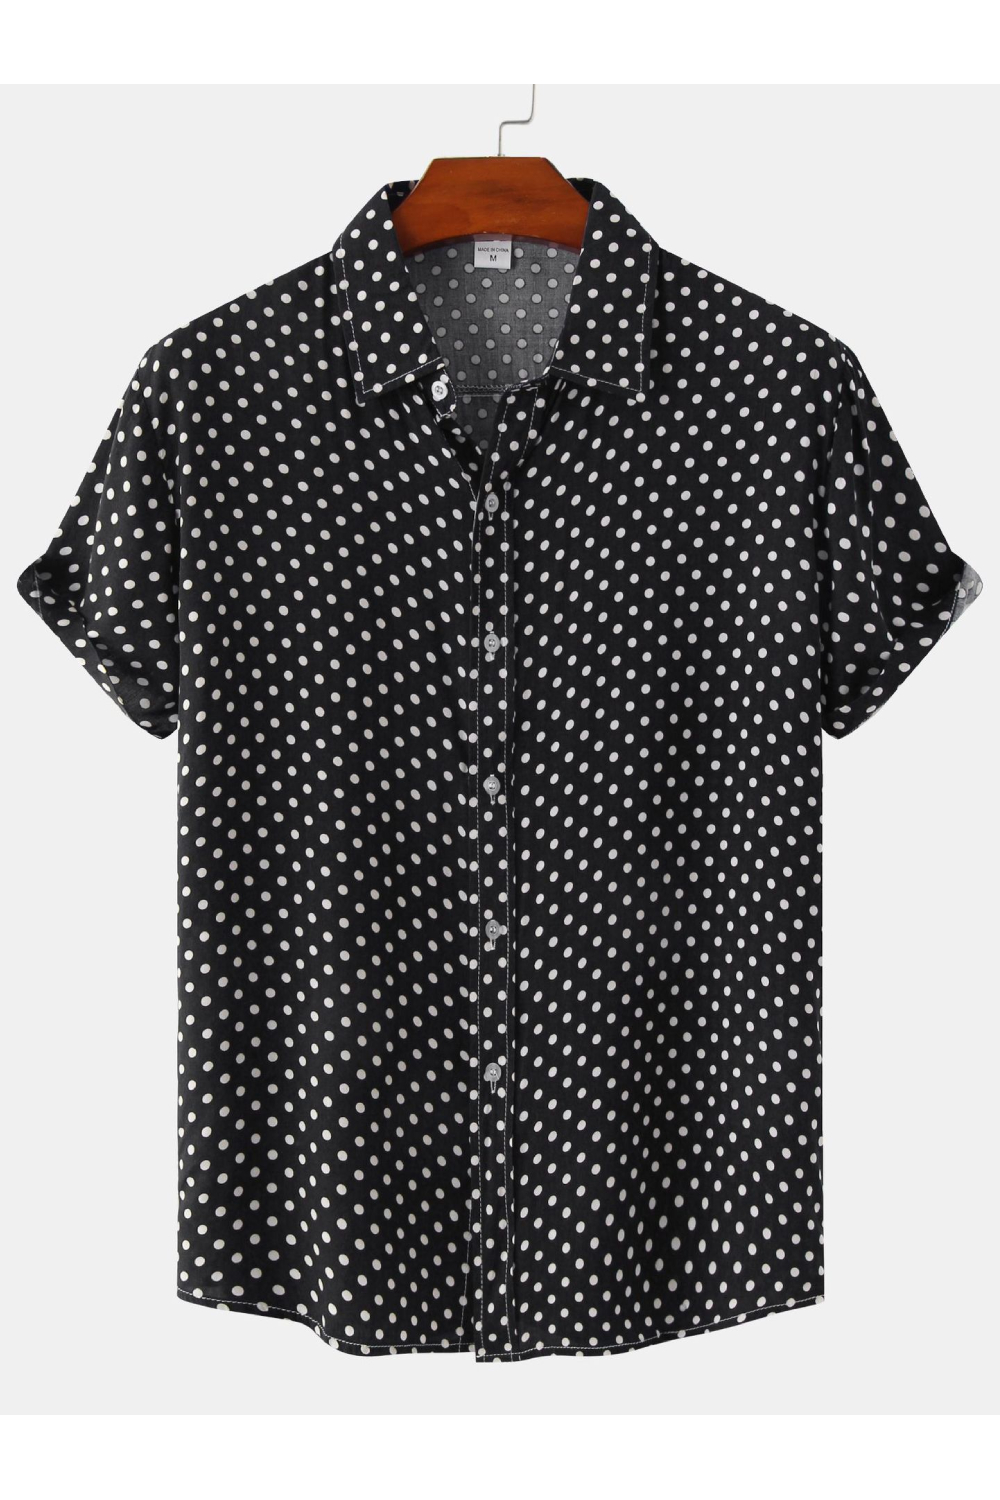 Movie Dalton Road House Polka Dots Button Front Shirt Outfits Halloween Carnival Suit Cosplay Costume